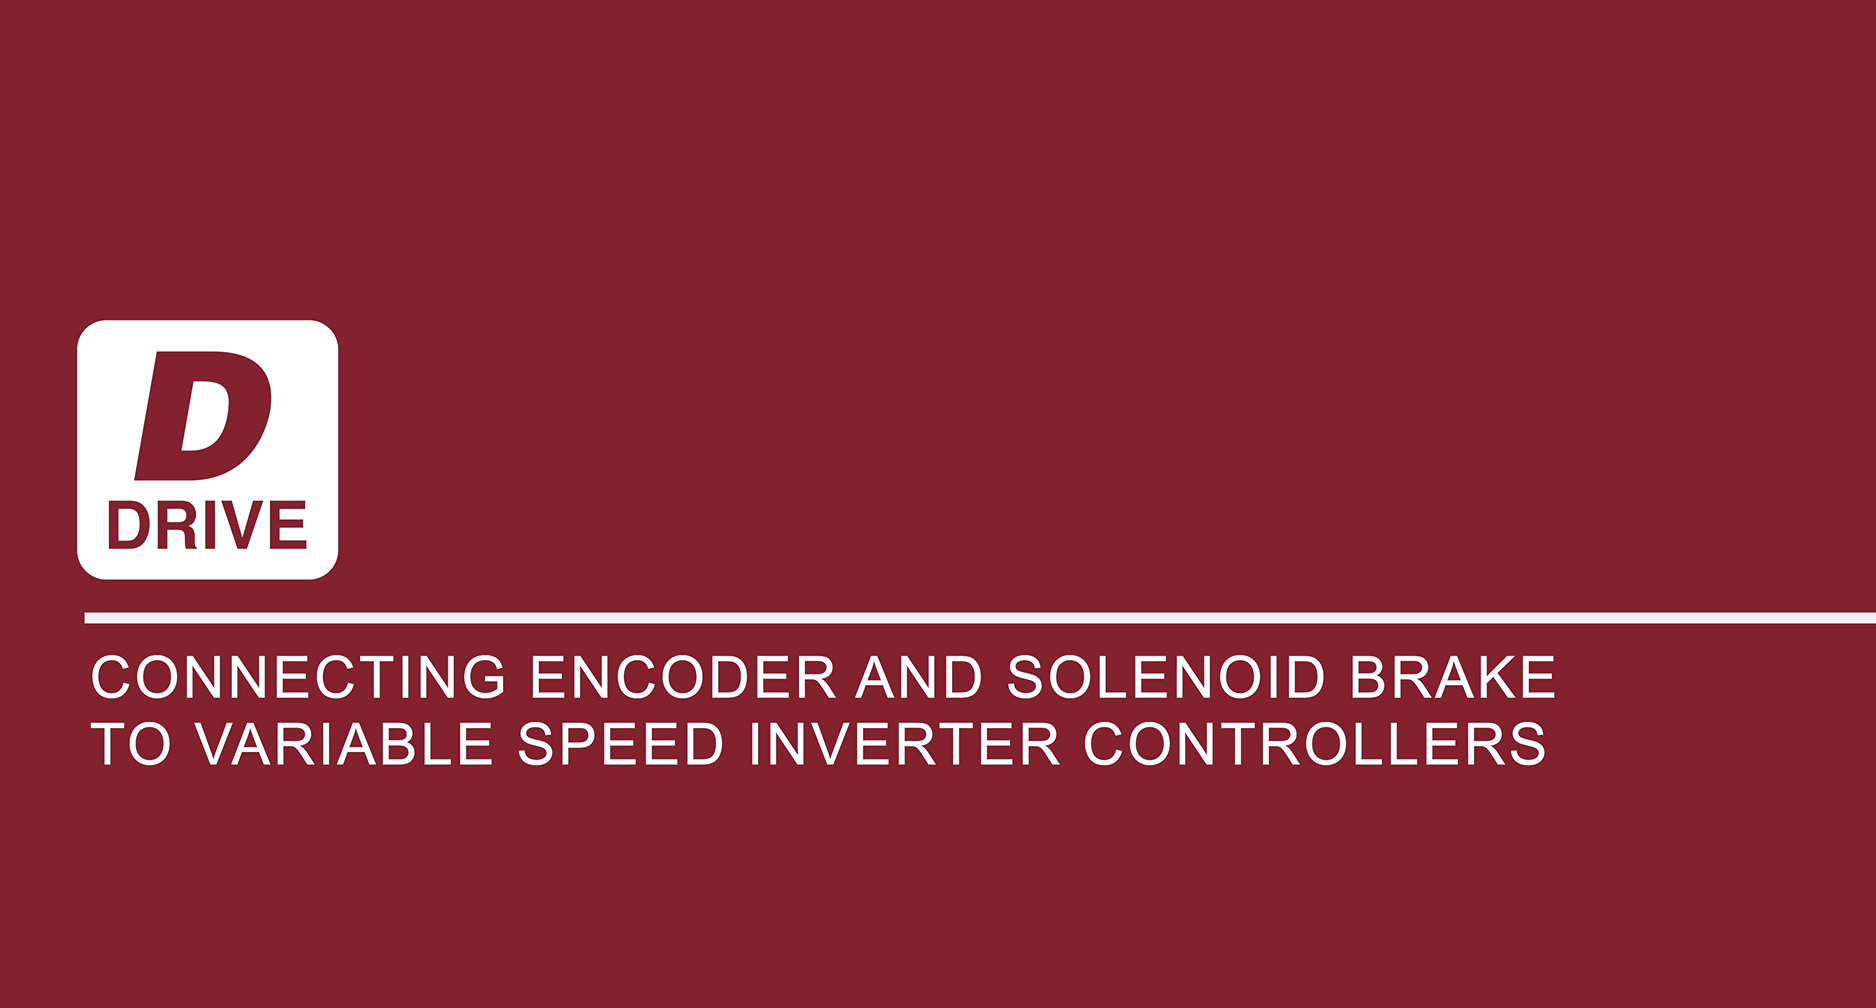 Connecting encoder and solenoid brake to single speed contactor controllers